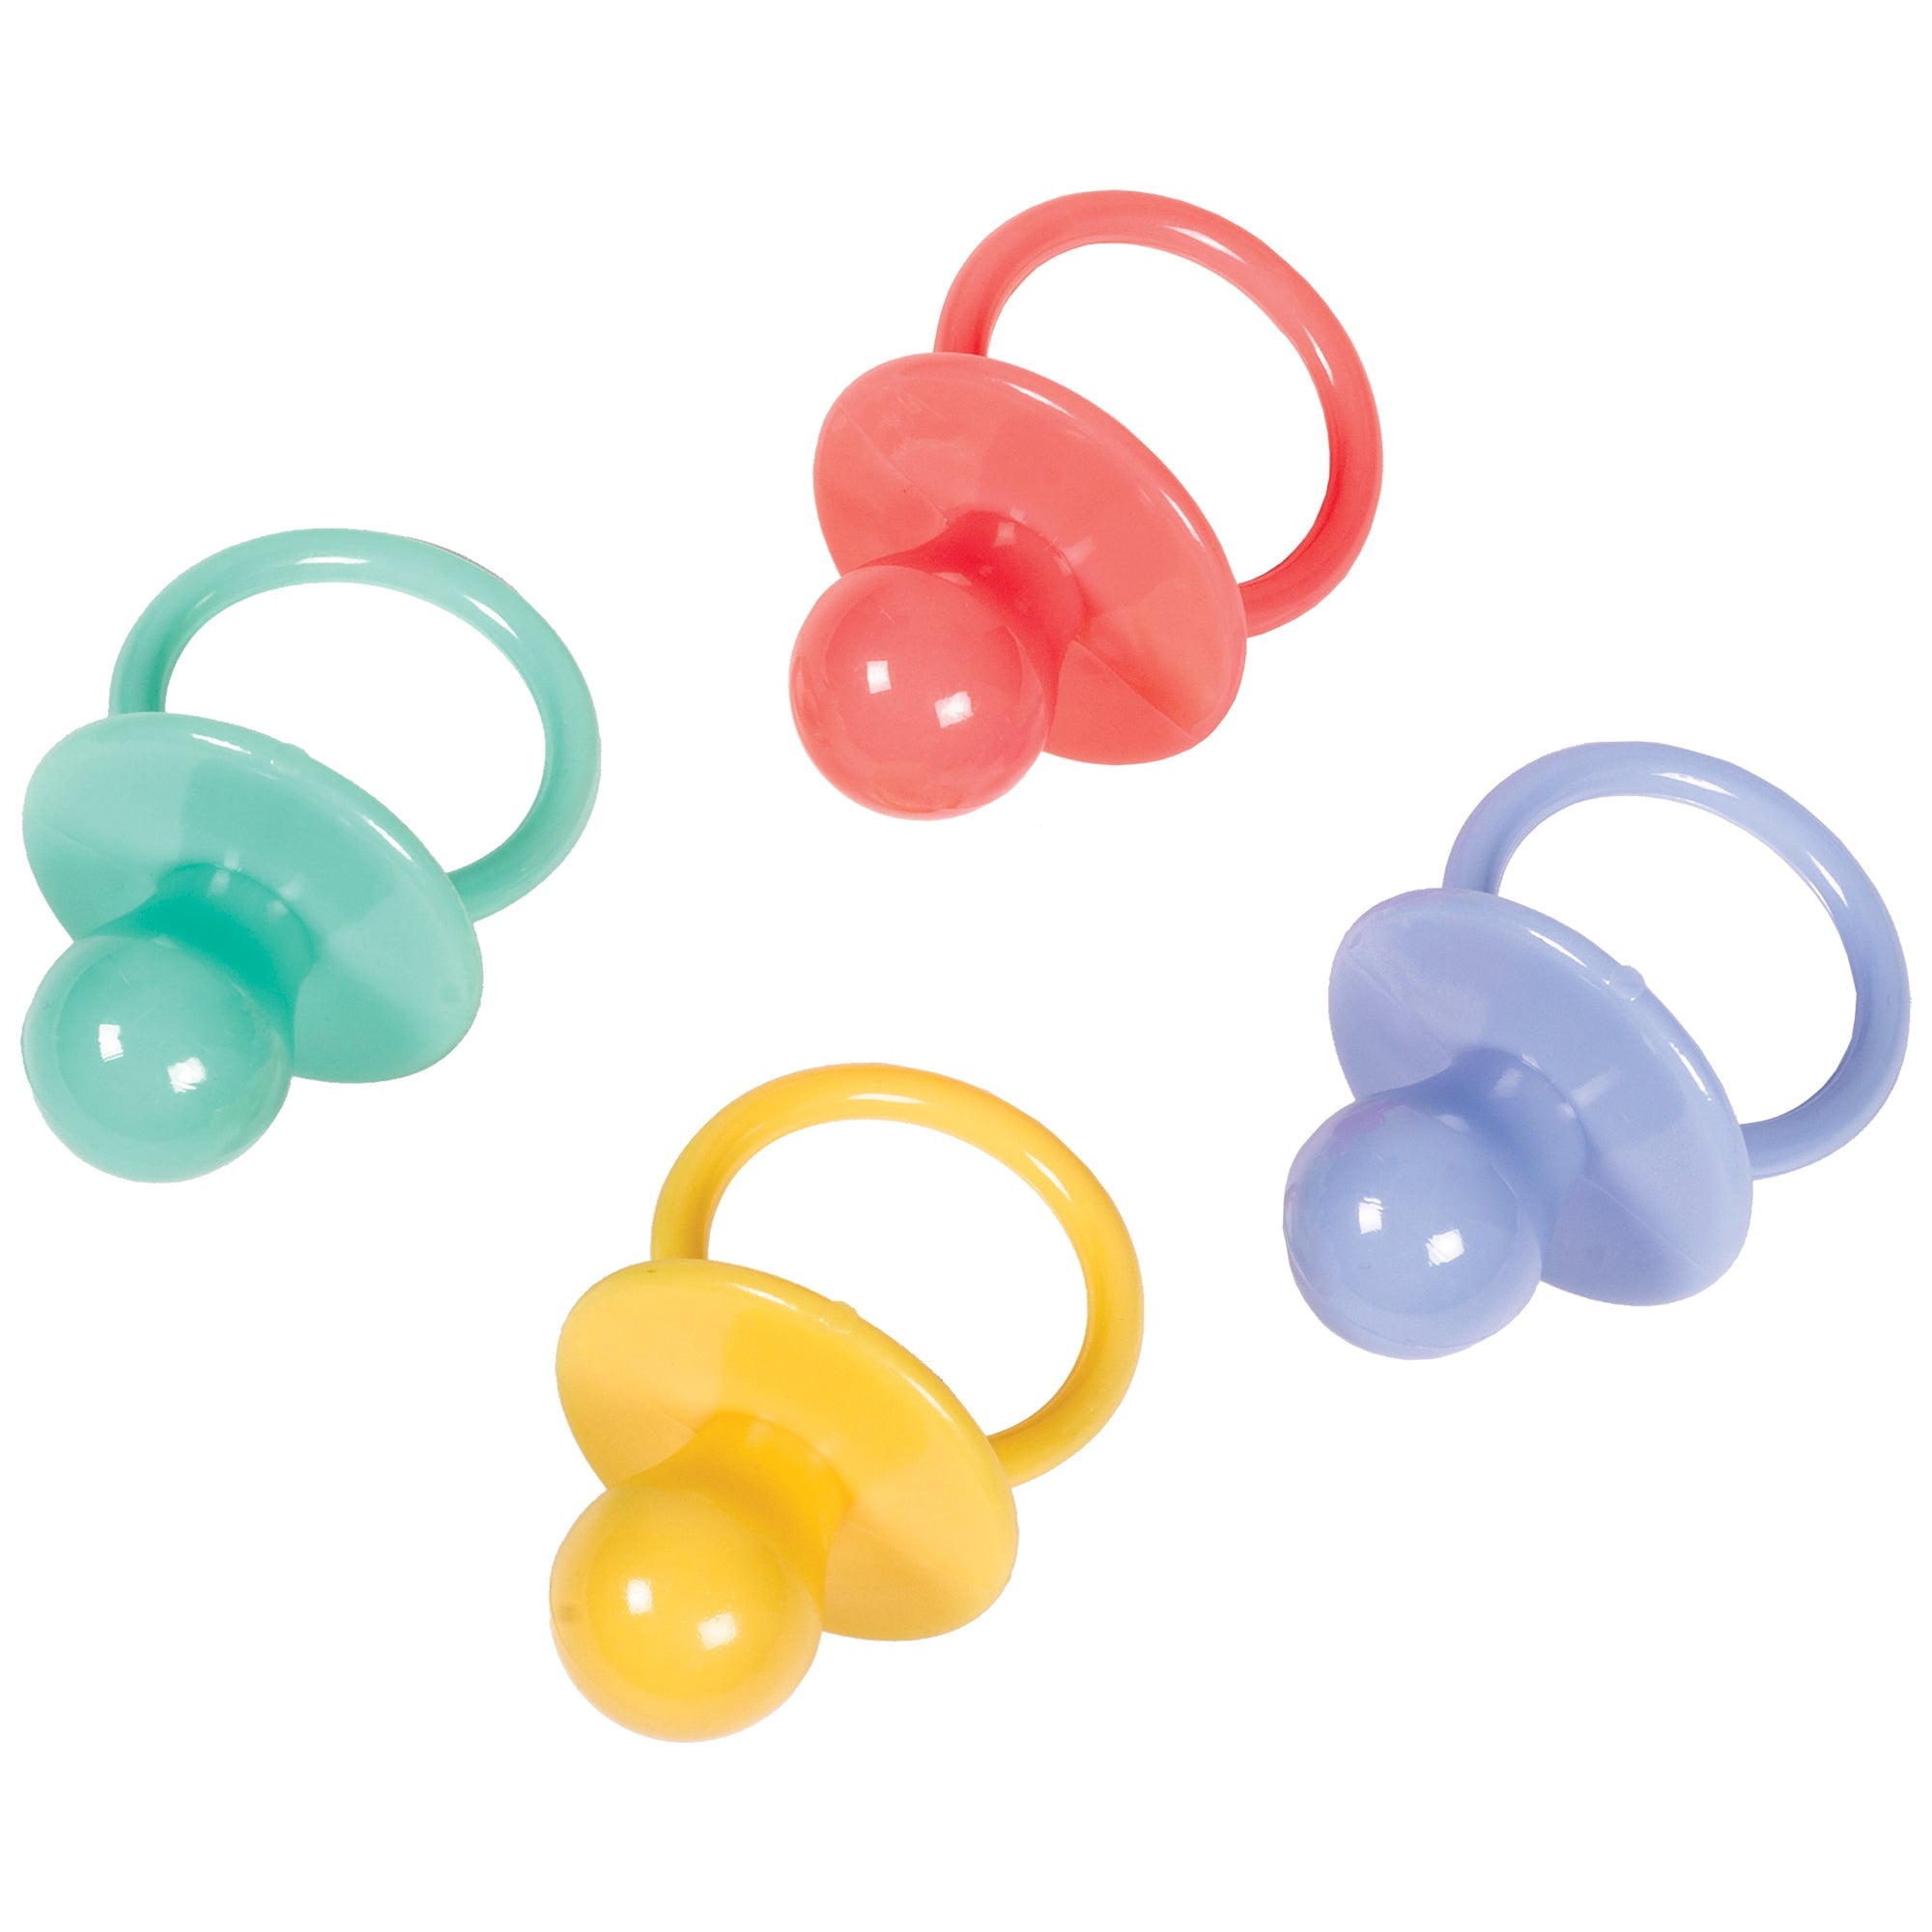 8 Large Pacifiers Favors   2.375x1.375in Multi